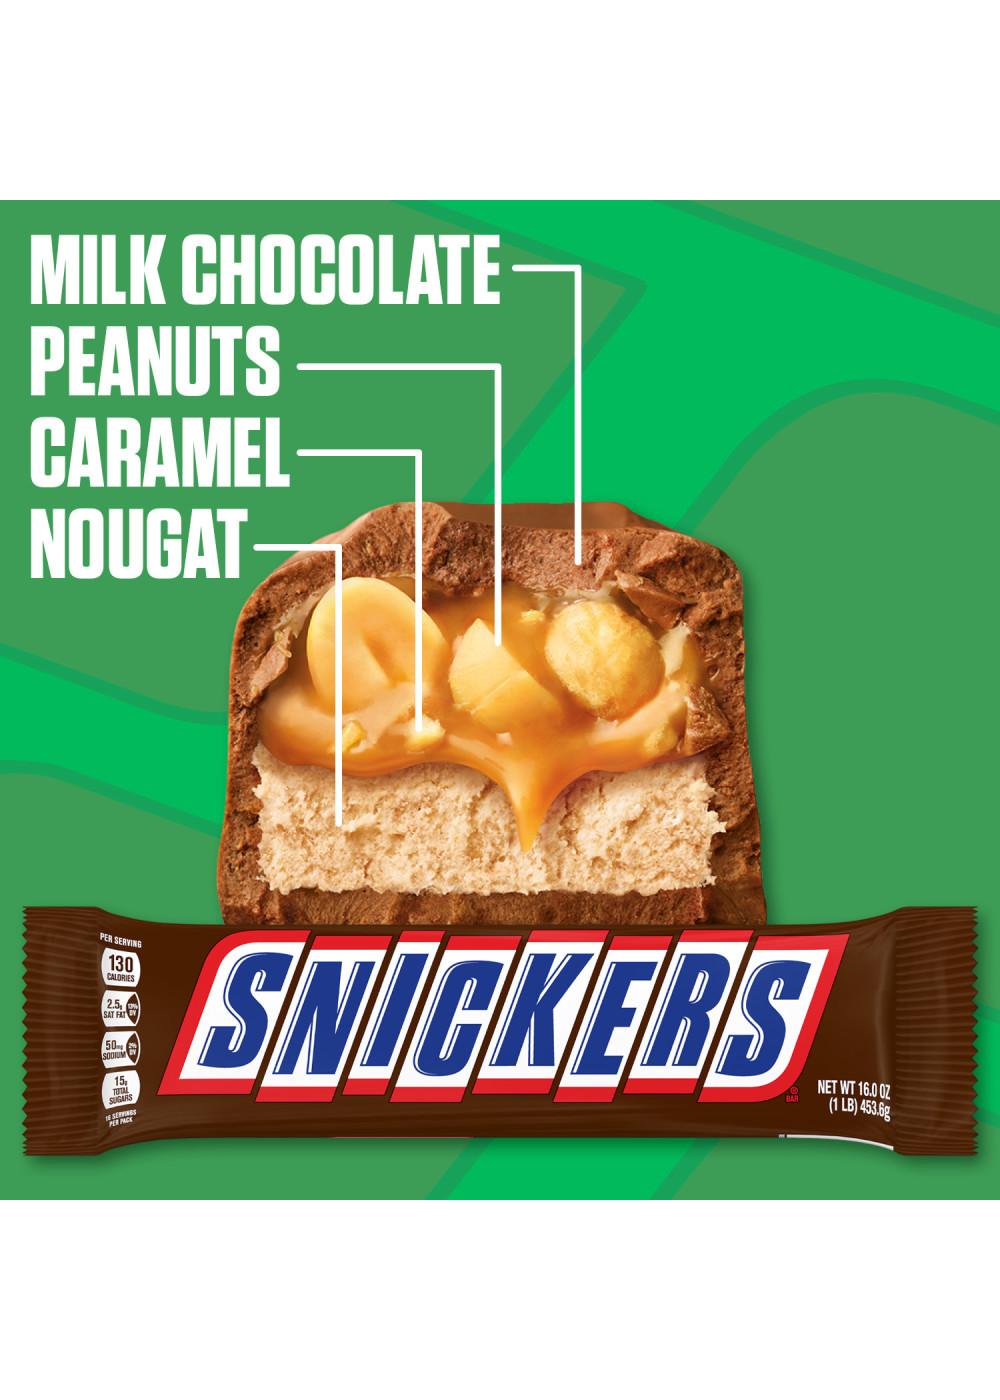 Snickers Chocolate Slice N' Share Holiday Candy Bar - Giant Size; image 7 of 7